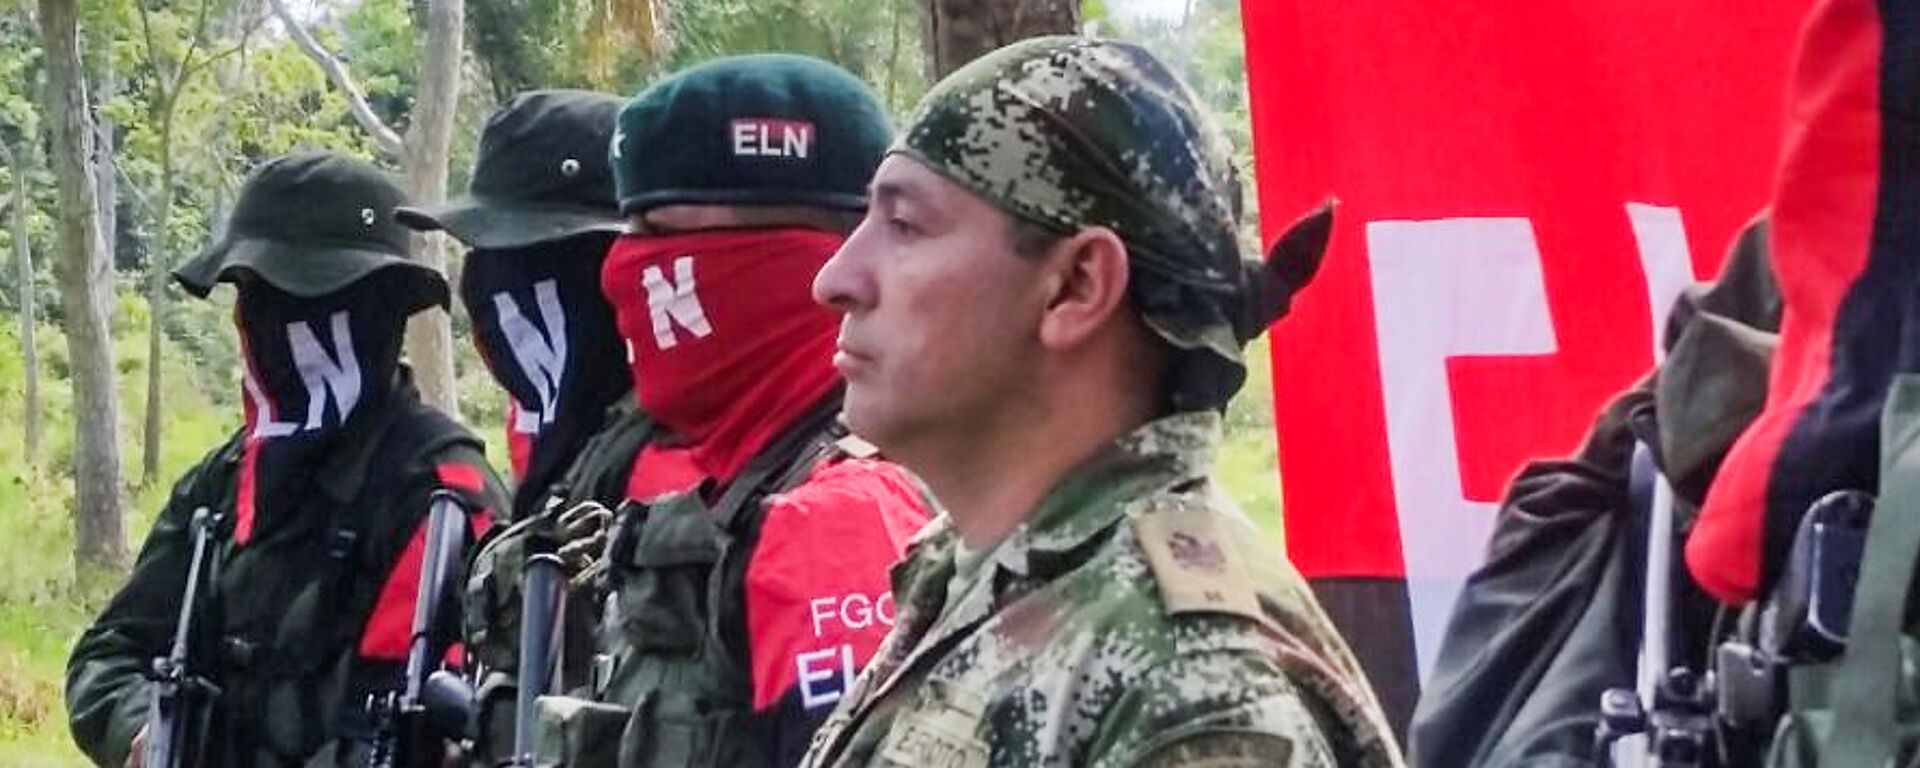 Colombian Soldier Fredy Moreno (R) who was kidnaped by National Liberation Army (ELN), is seen next to ELN members, before his release in Arauca, Colombia on February 6 2017 - Sputnik Mundo, 1920, 23.11.2021